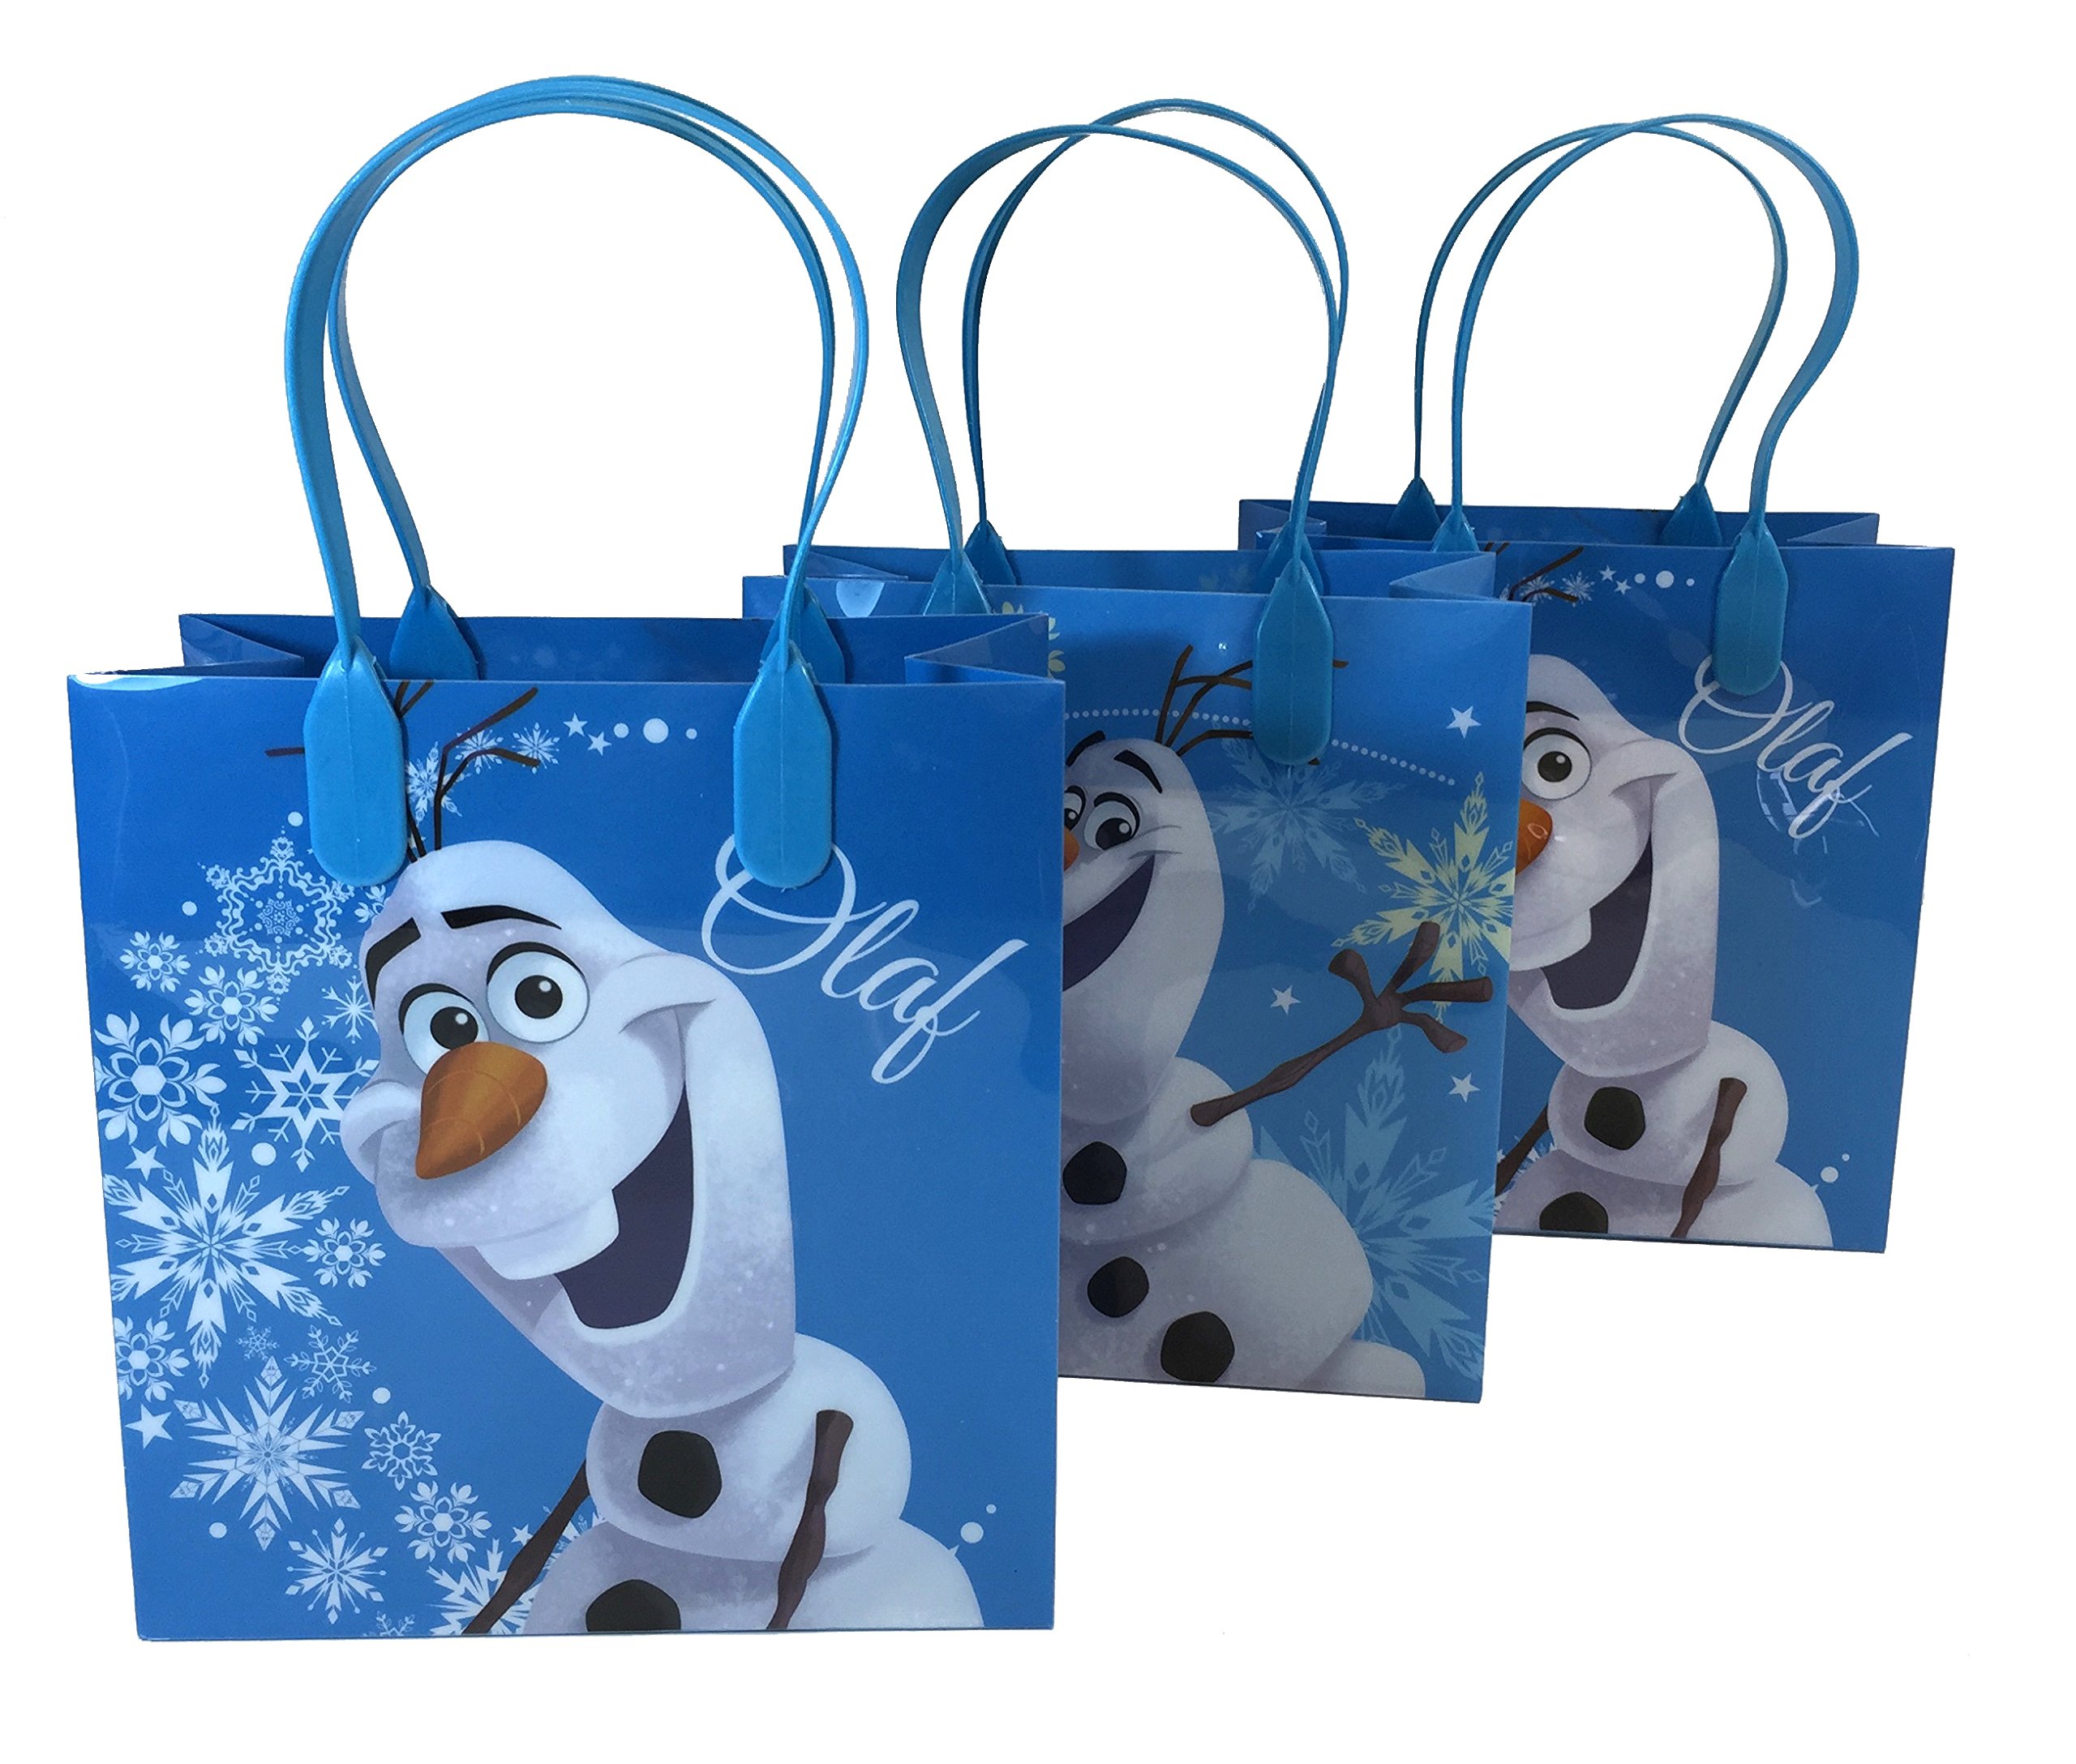 Disney Nickelodeon Marvel Birthday Goodies Gift Favor Bags Party Supplies - 12 Pieces (Olaf - Blue)